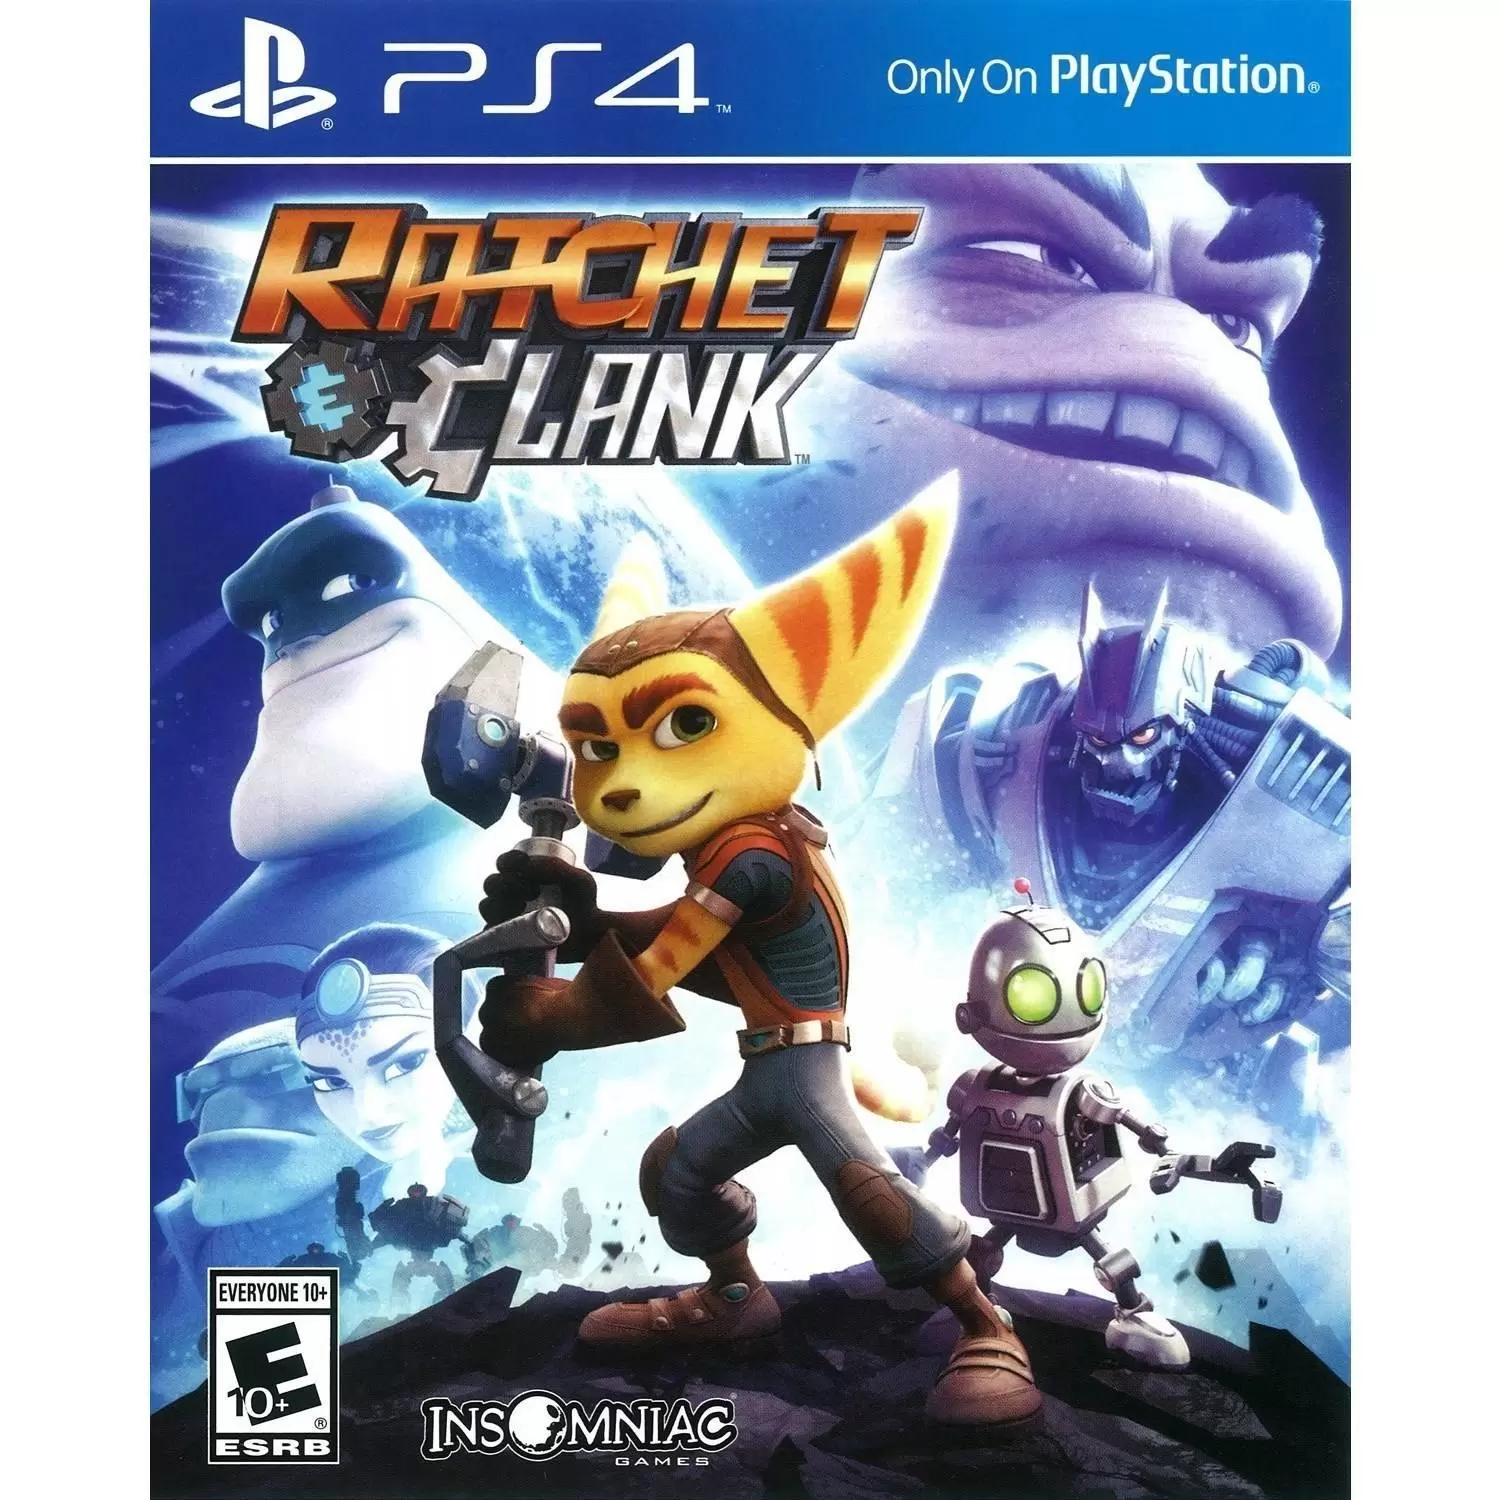 PS4 Games - Ratchet & Clank